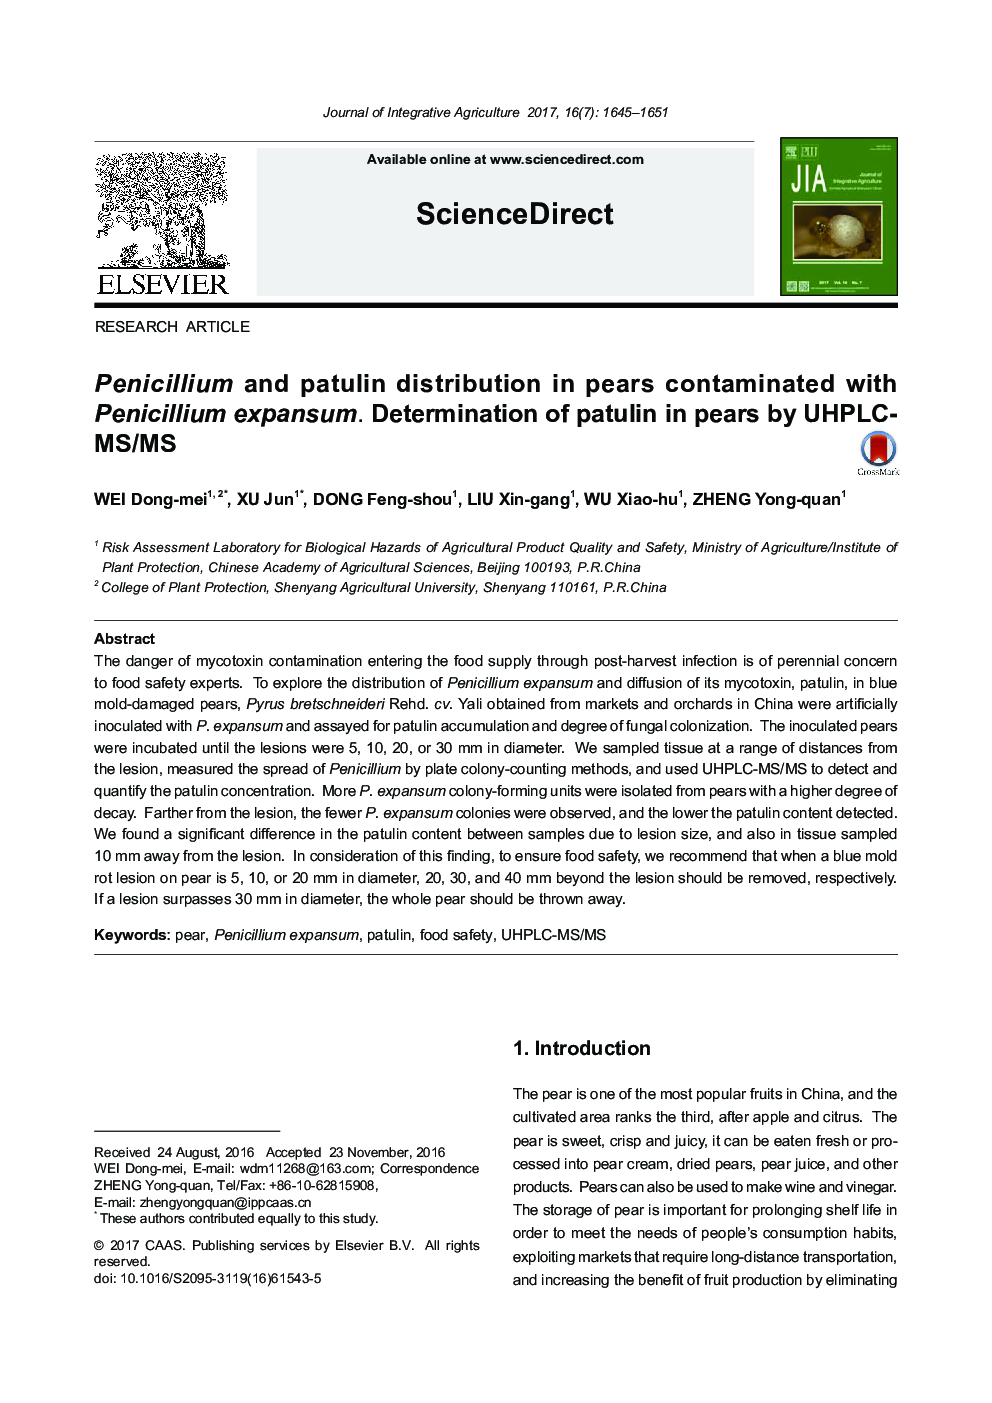 Penicillium and patulin distribution in pears contaminated with Penicillium expansum. Determination of patulin in pears by UHPLC-MS/MS